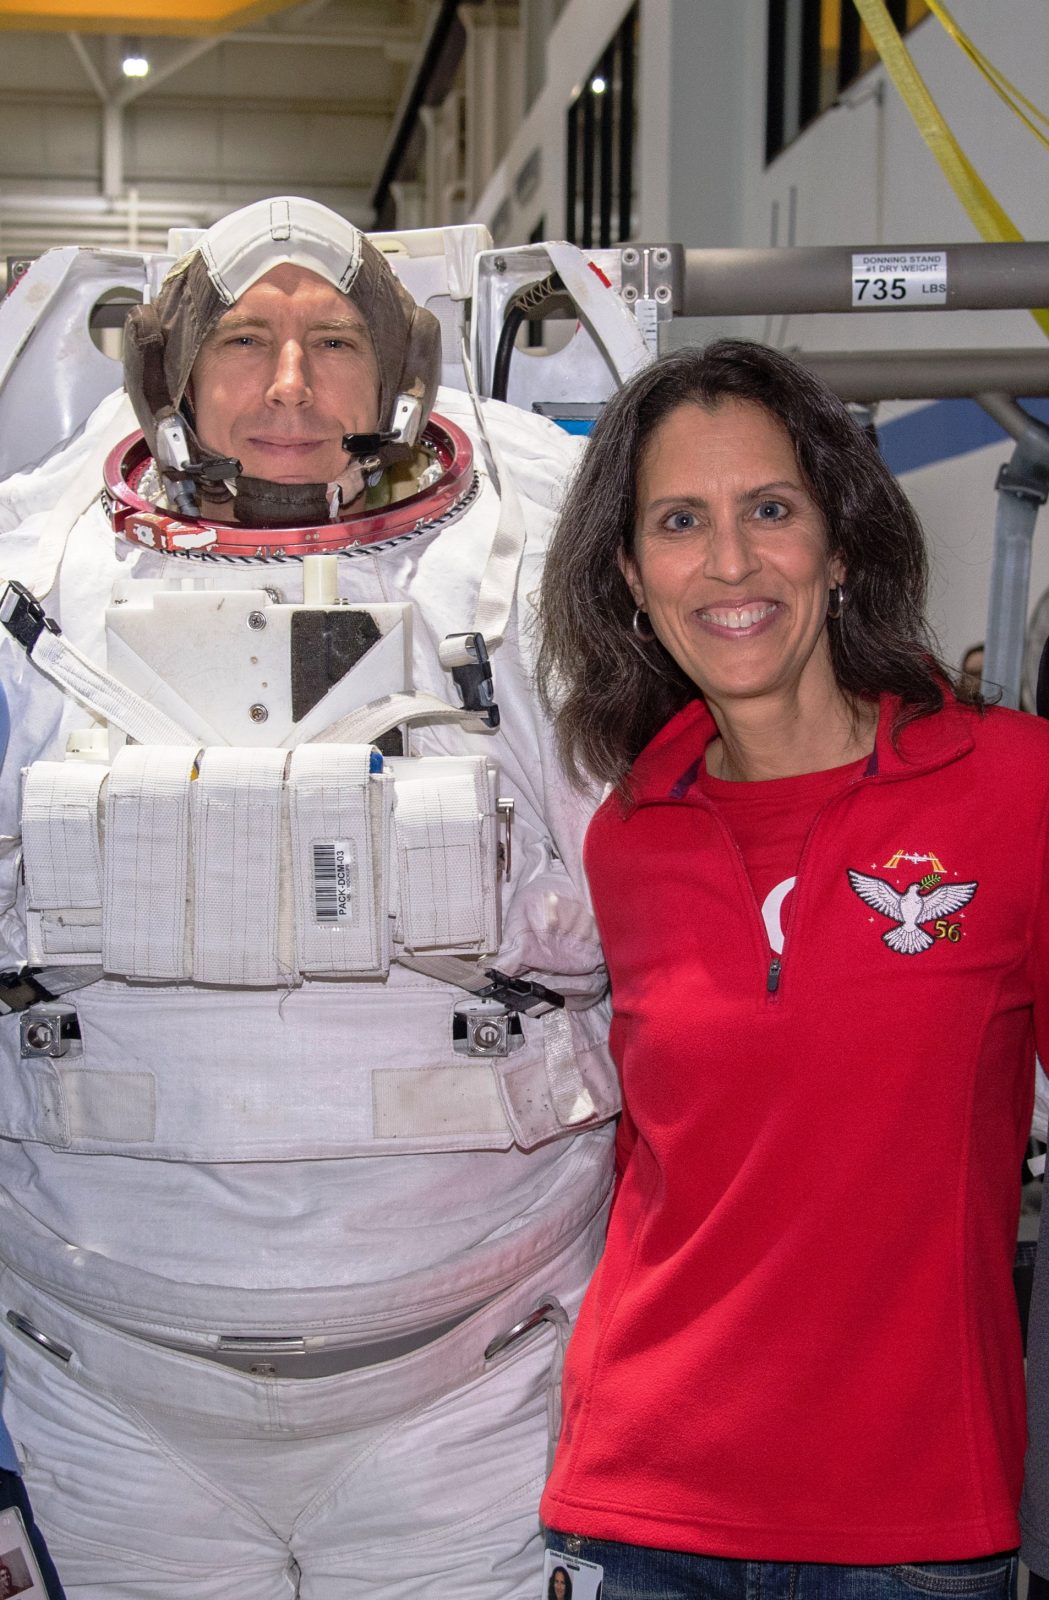 NASA astronaut blasting off to space has strong Cornwall connection